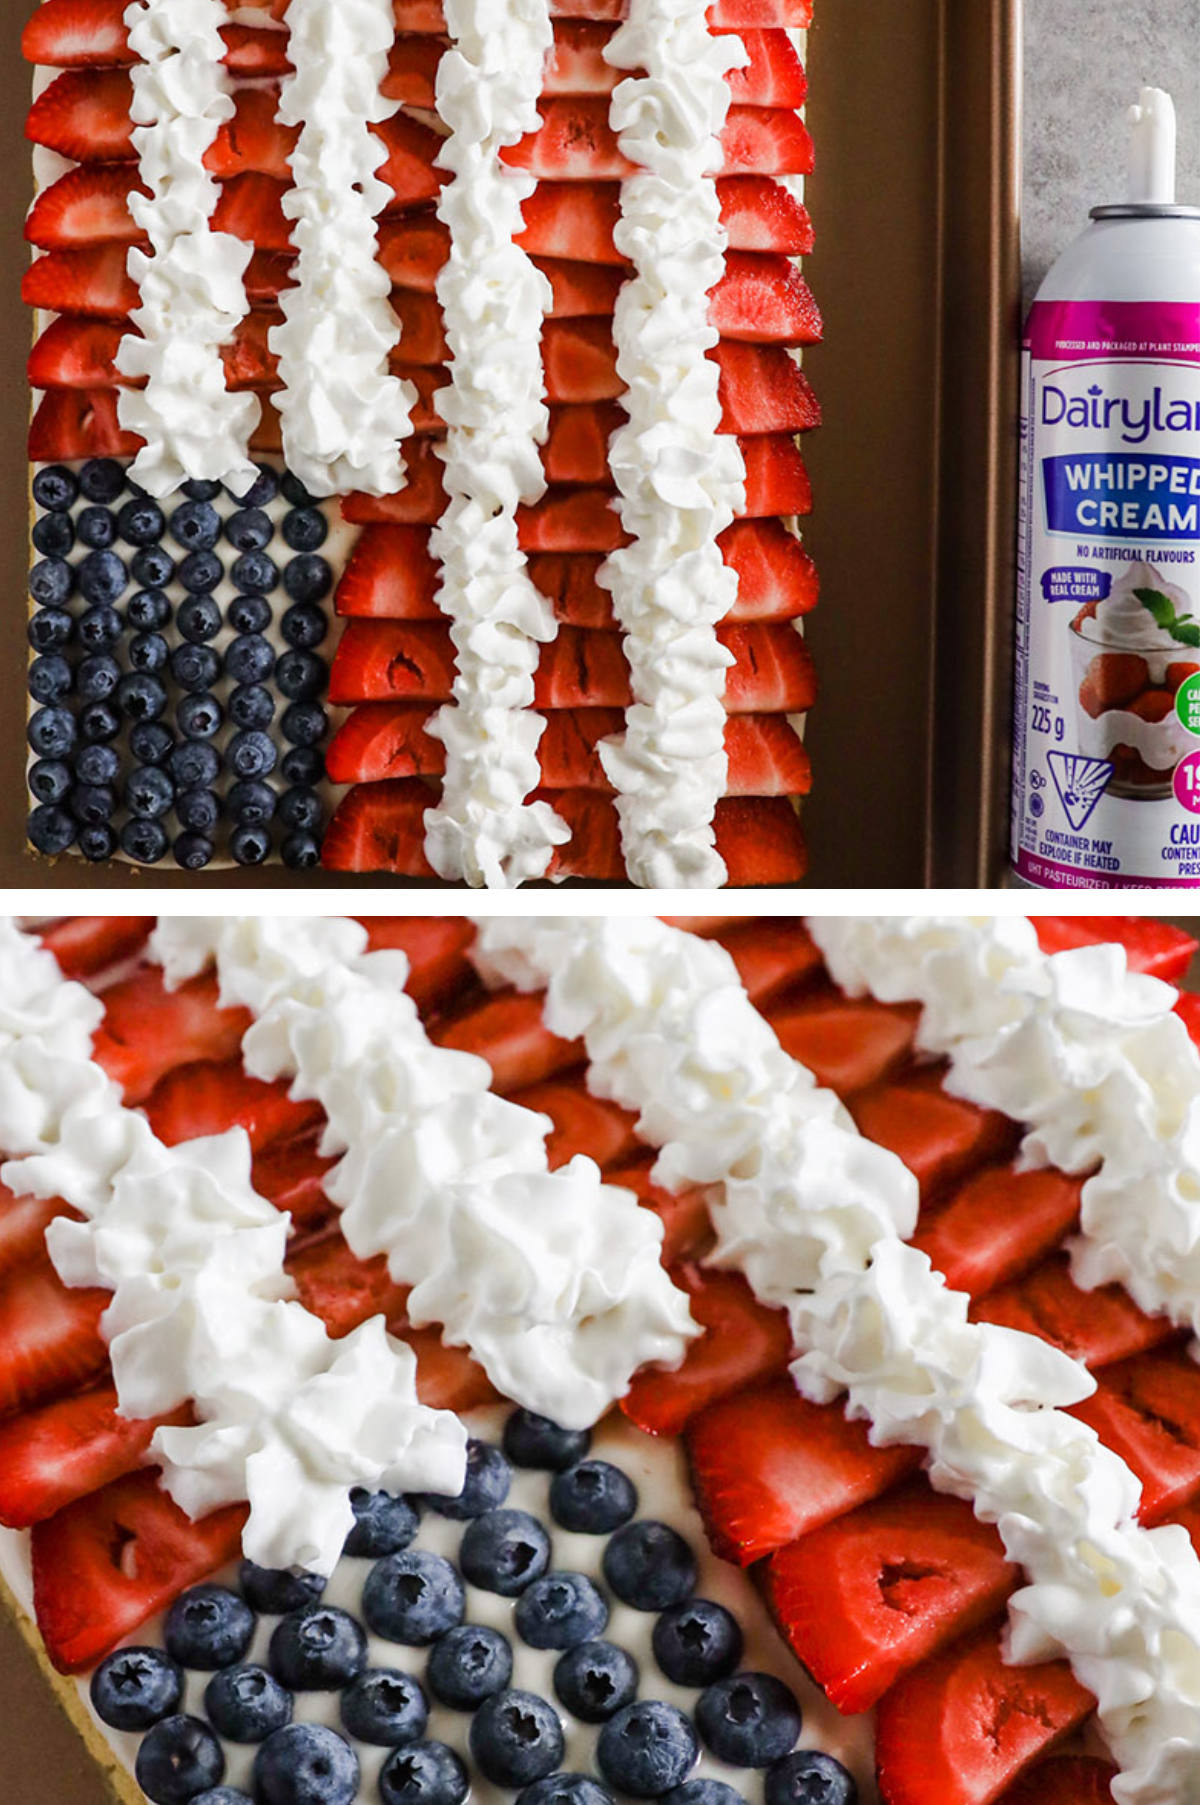 Four overhead images in one: 1. Whipped cream is added to the cookie, a can of whipped cream sits to the side. 2. Close up of blueberries, sliced strawberries and whipped cream on flag fruit pizza.